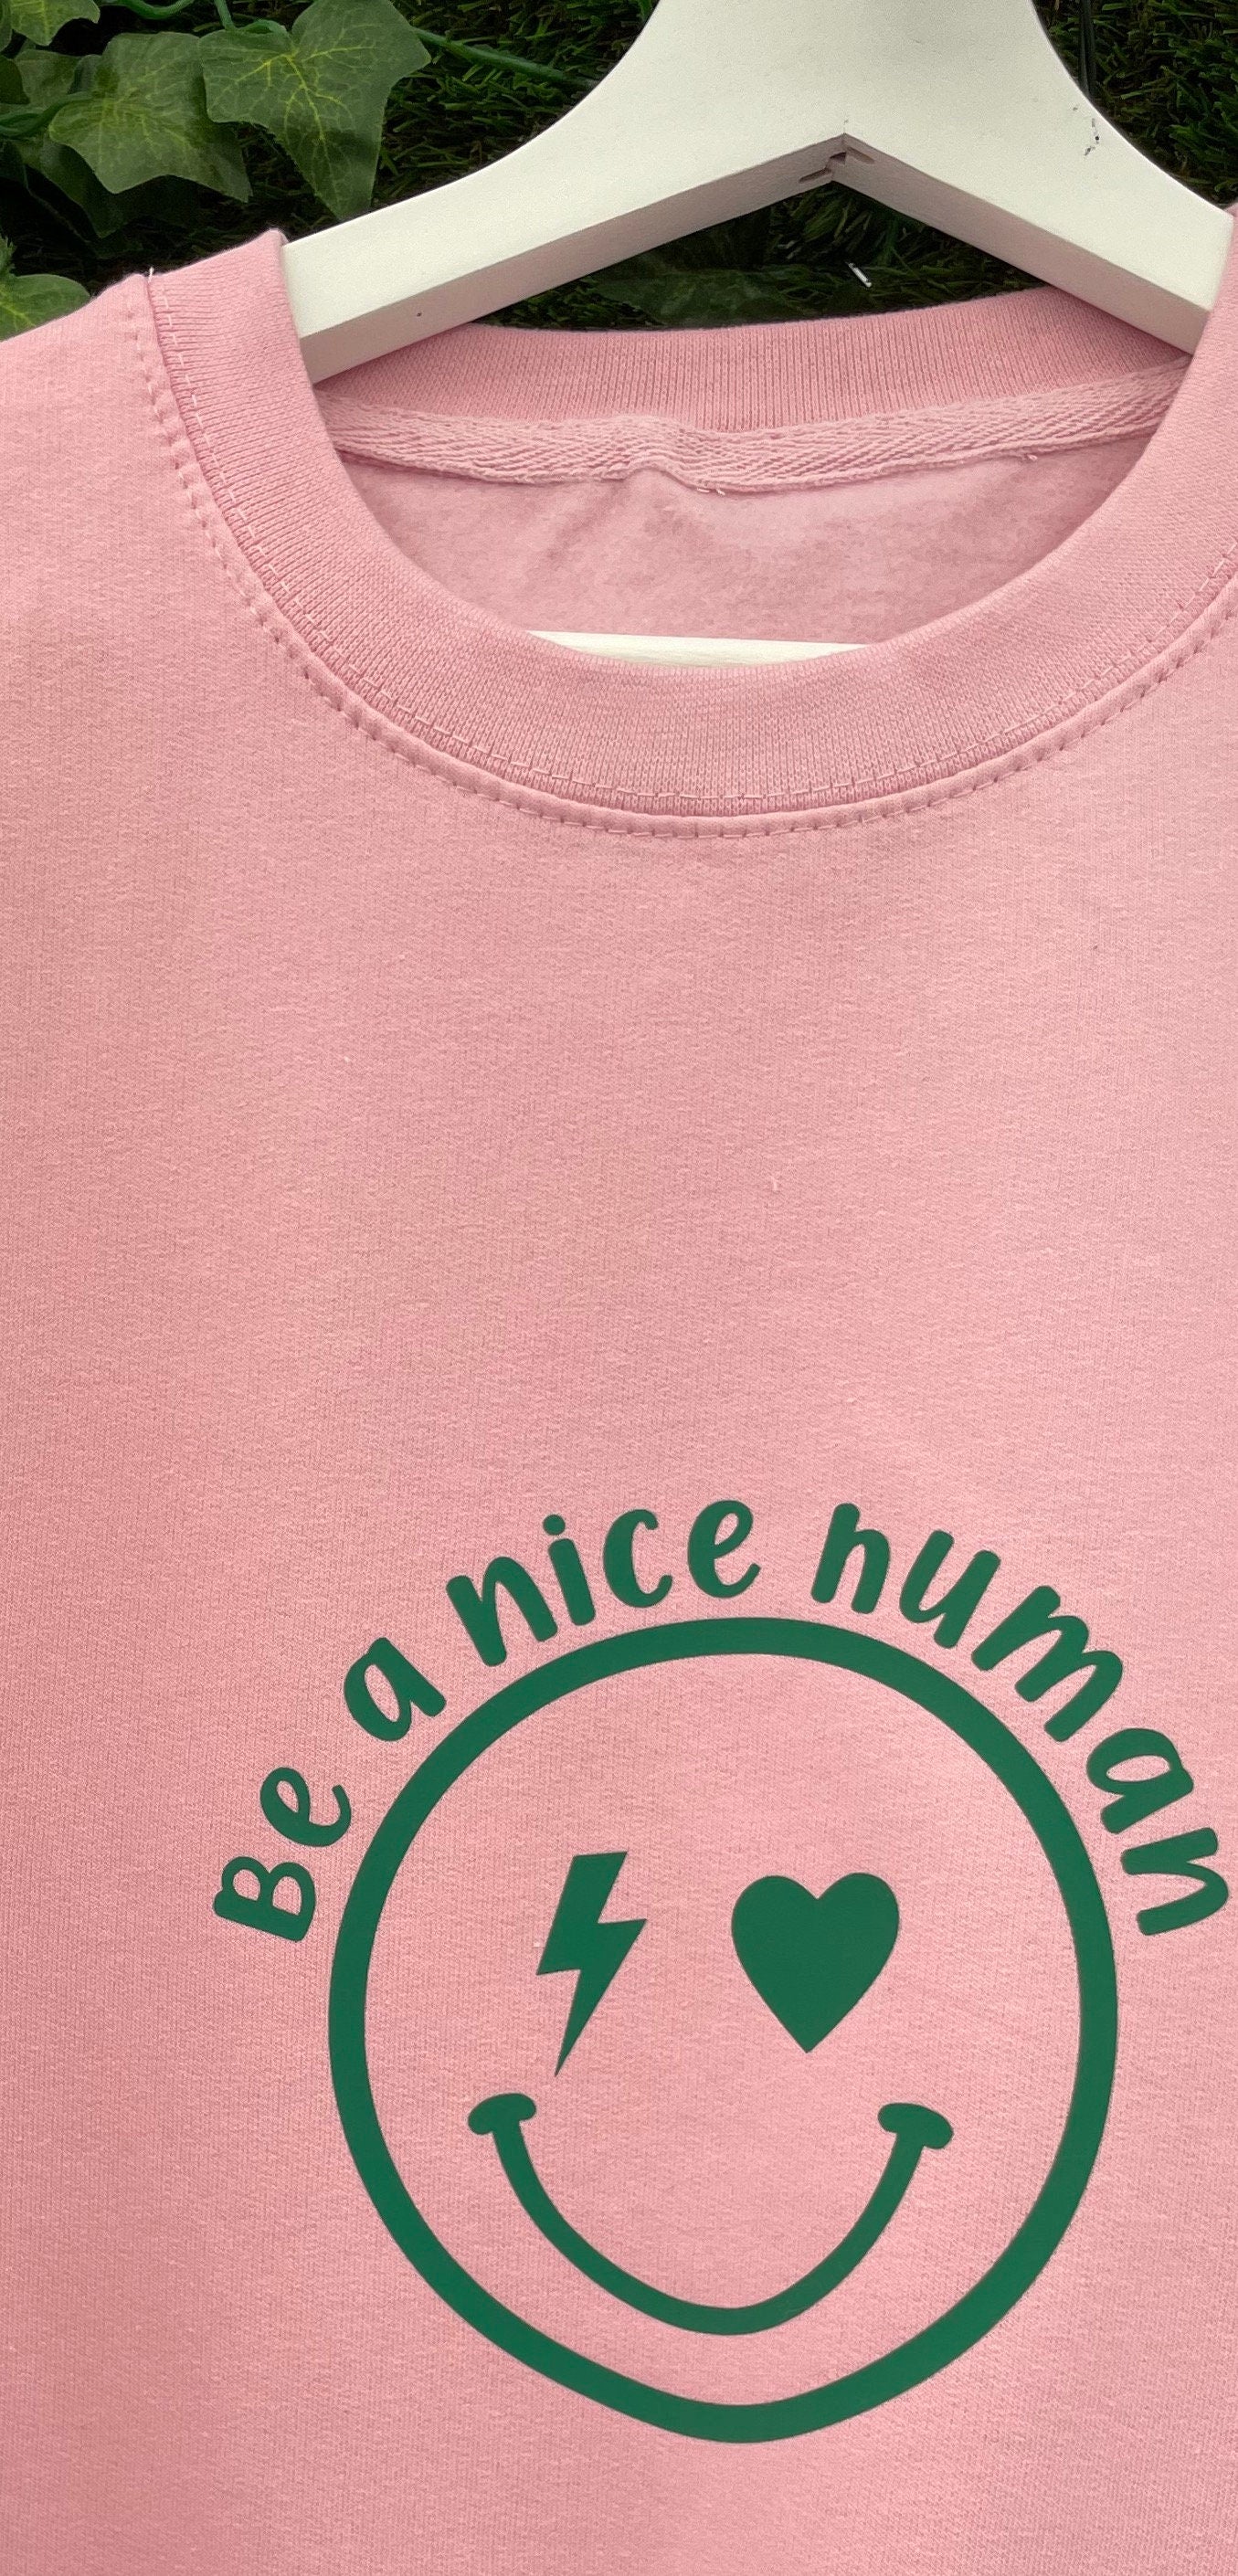 Be A Nice Human Slogan Sweatshirt, Kindness, Lightning Bolt Smiley Face Sweater, Gift For Her, Friendship Gift, Cool to Be Kind Unisex Fit